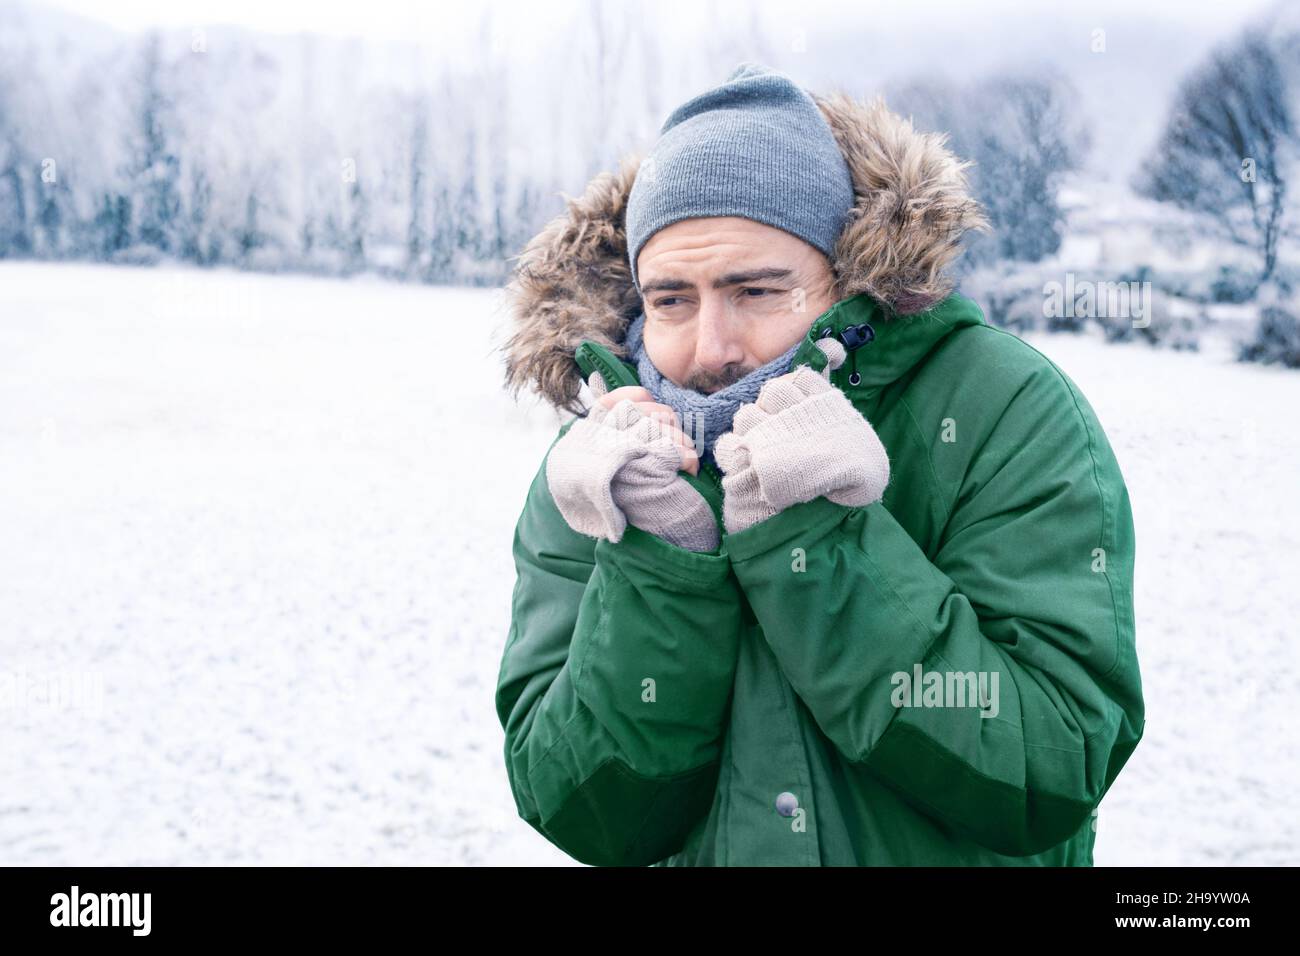 Man In Winter Clothes Shivering From The Cold Stock Photo, Picture and  Royalty Free Image. Image 12116568.